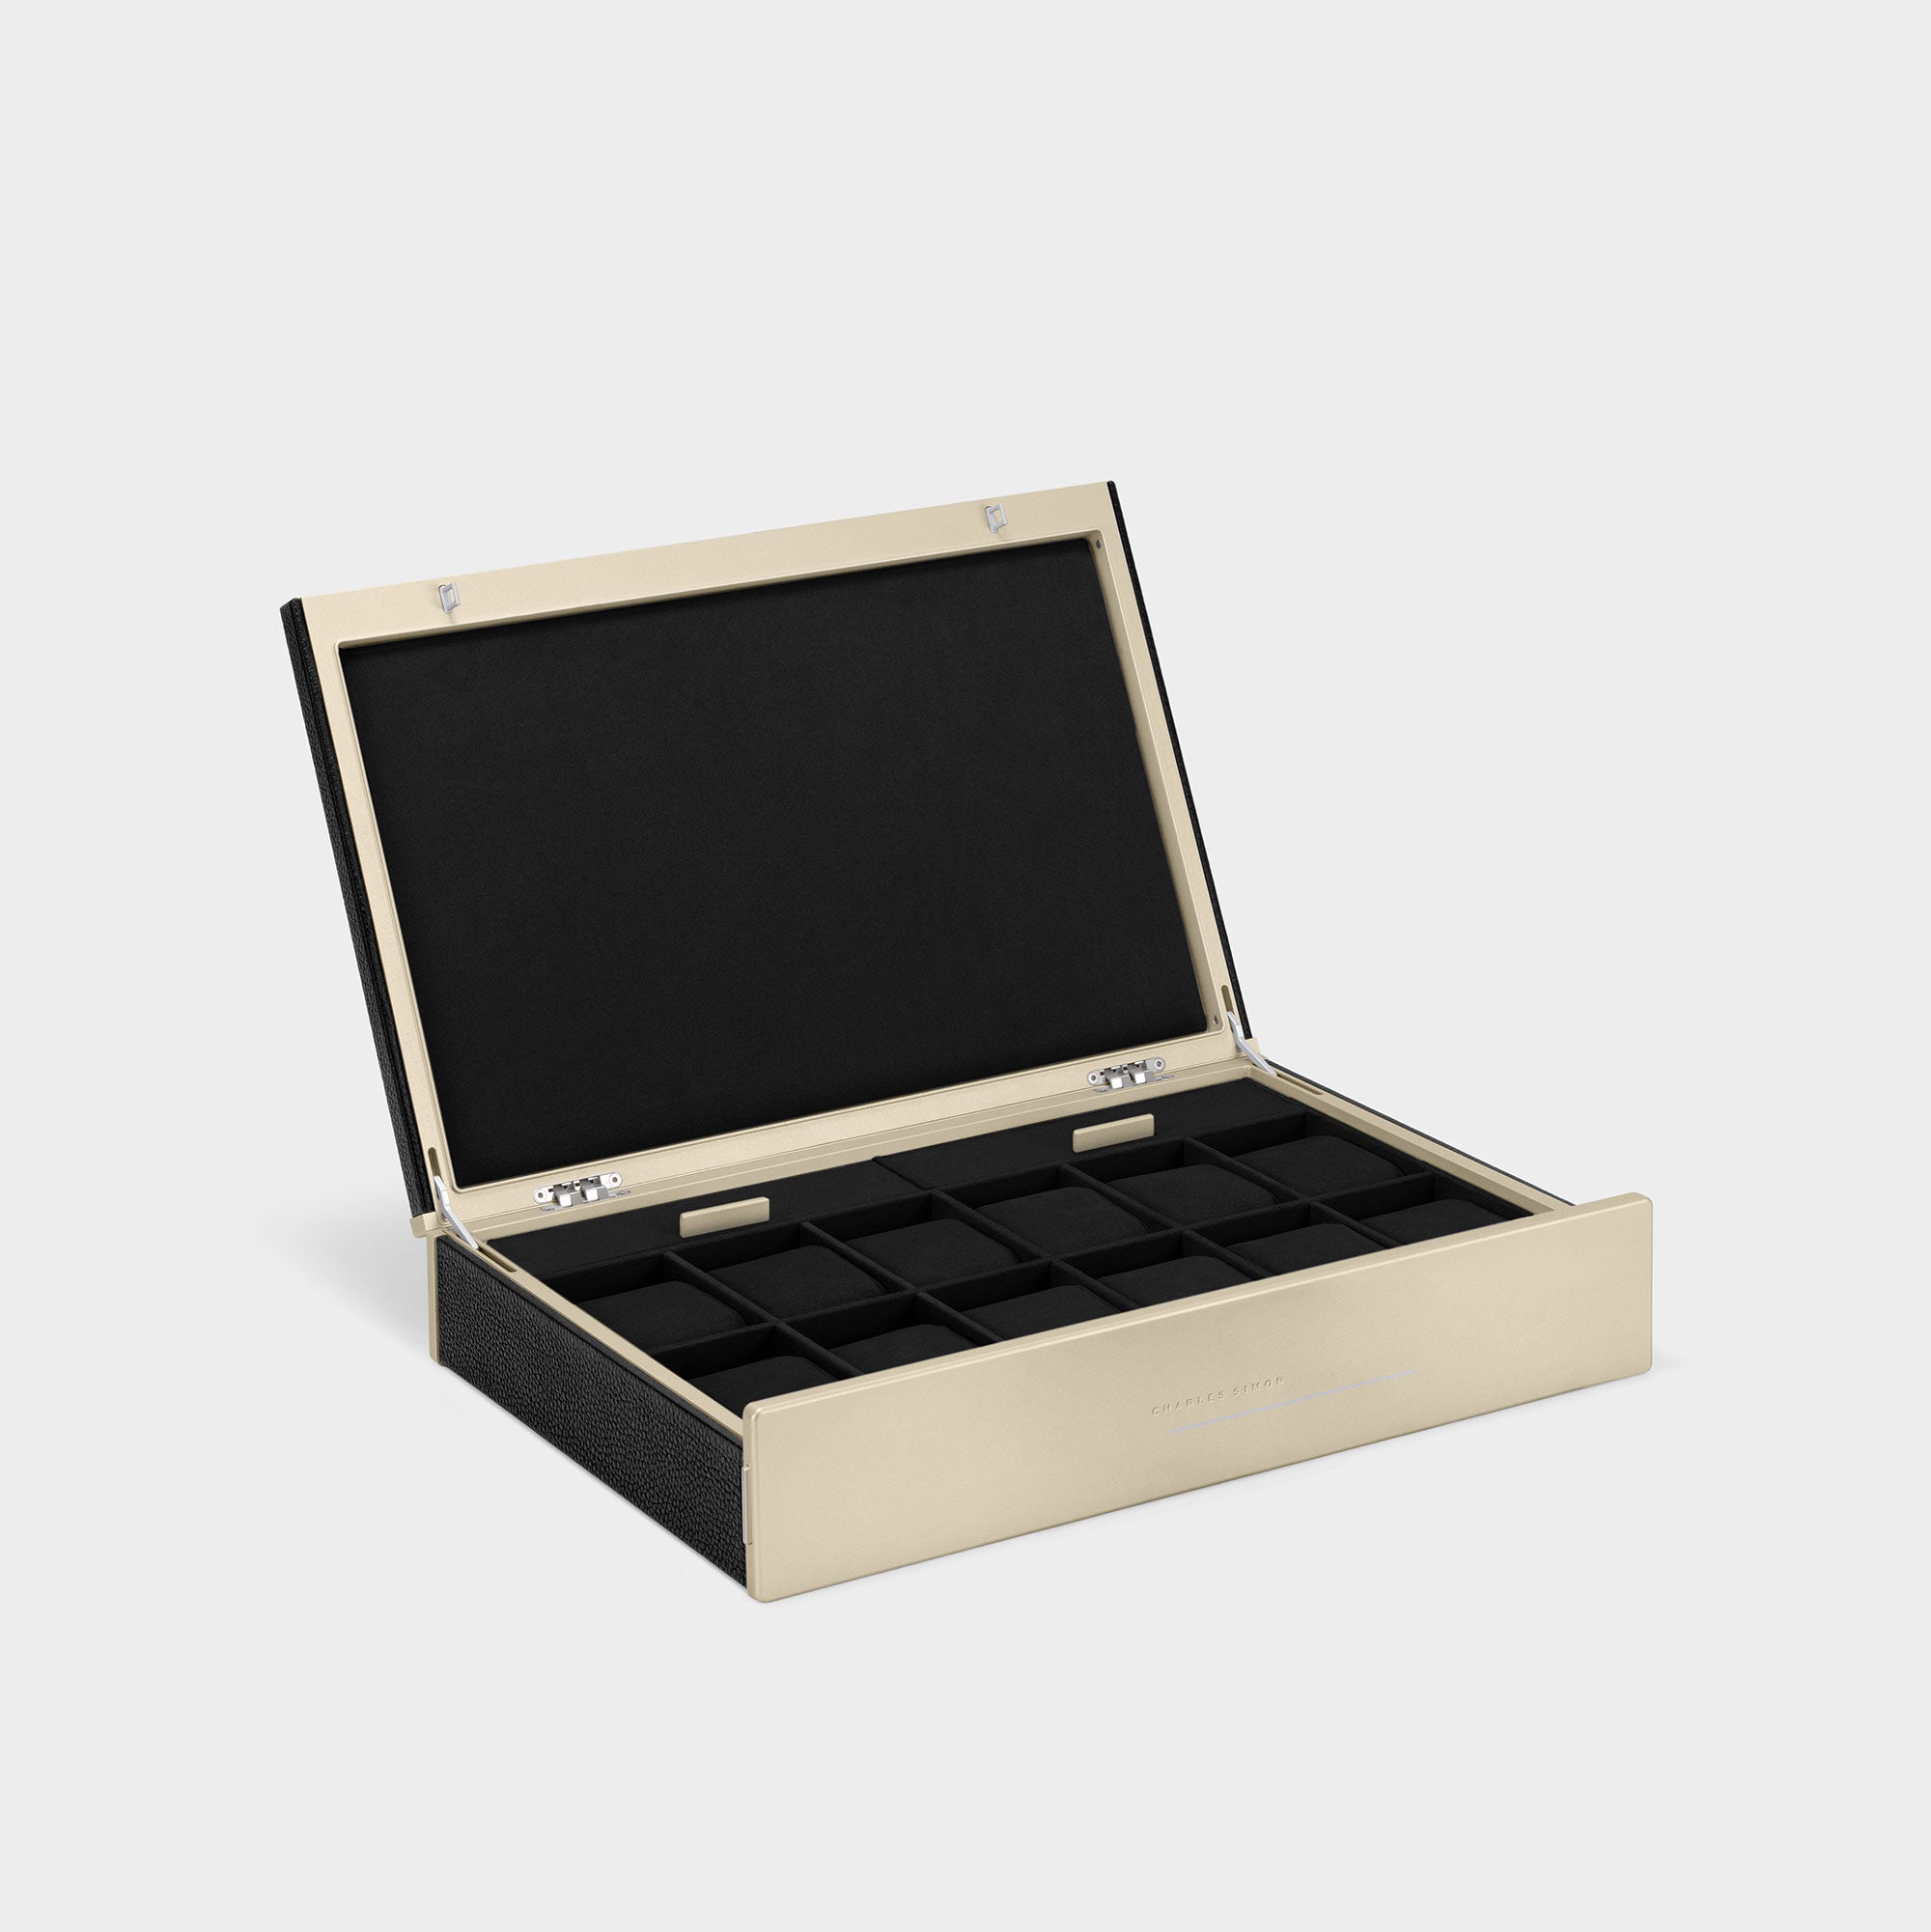 Open Spence 12 gold watch box in premium leather, carbon fiber and anodized aluminum casing and Alcantara interior lining. Handmade in Canada for a watch collection of up to  12 watches